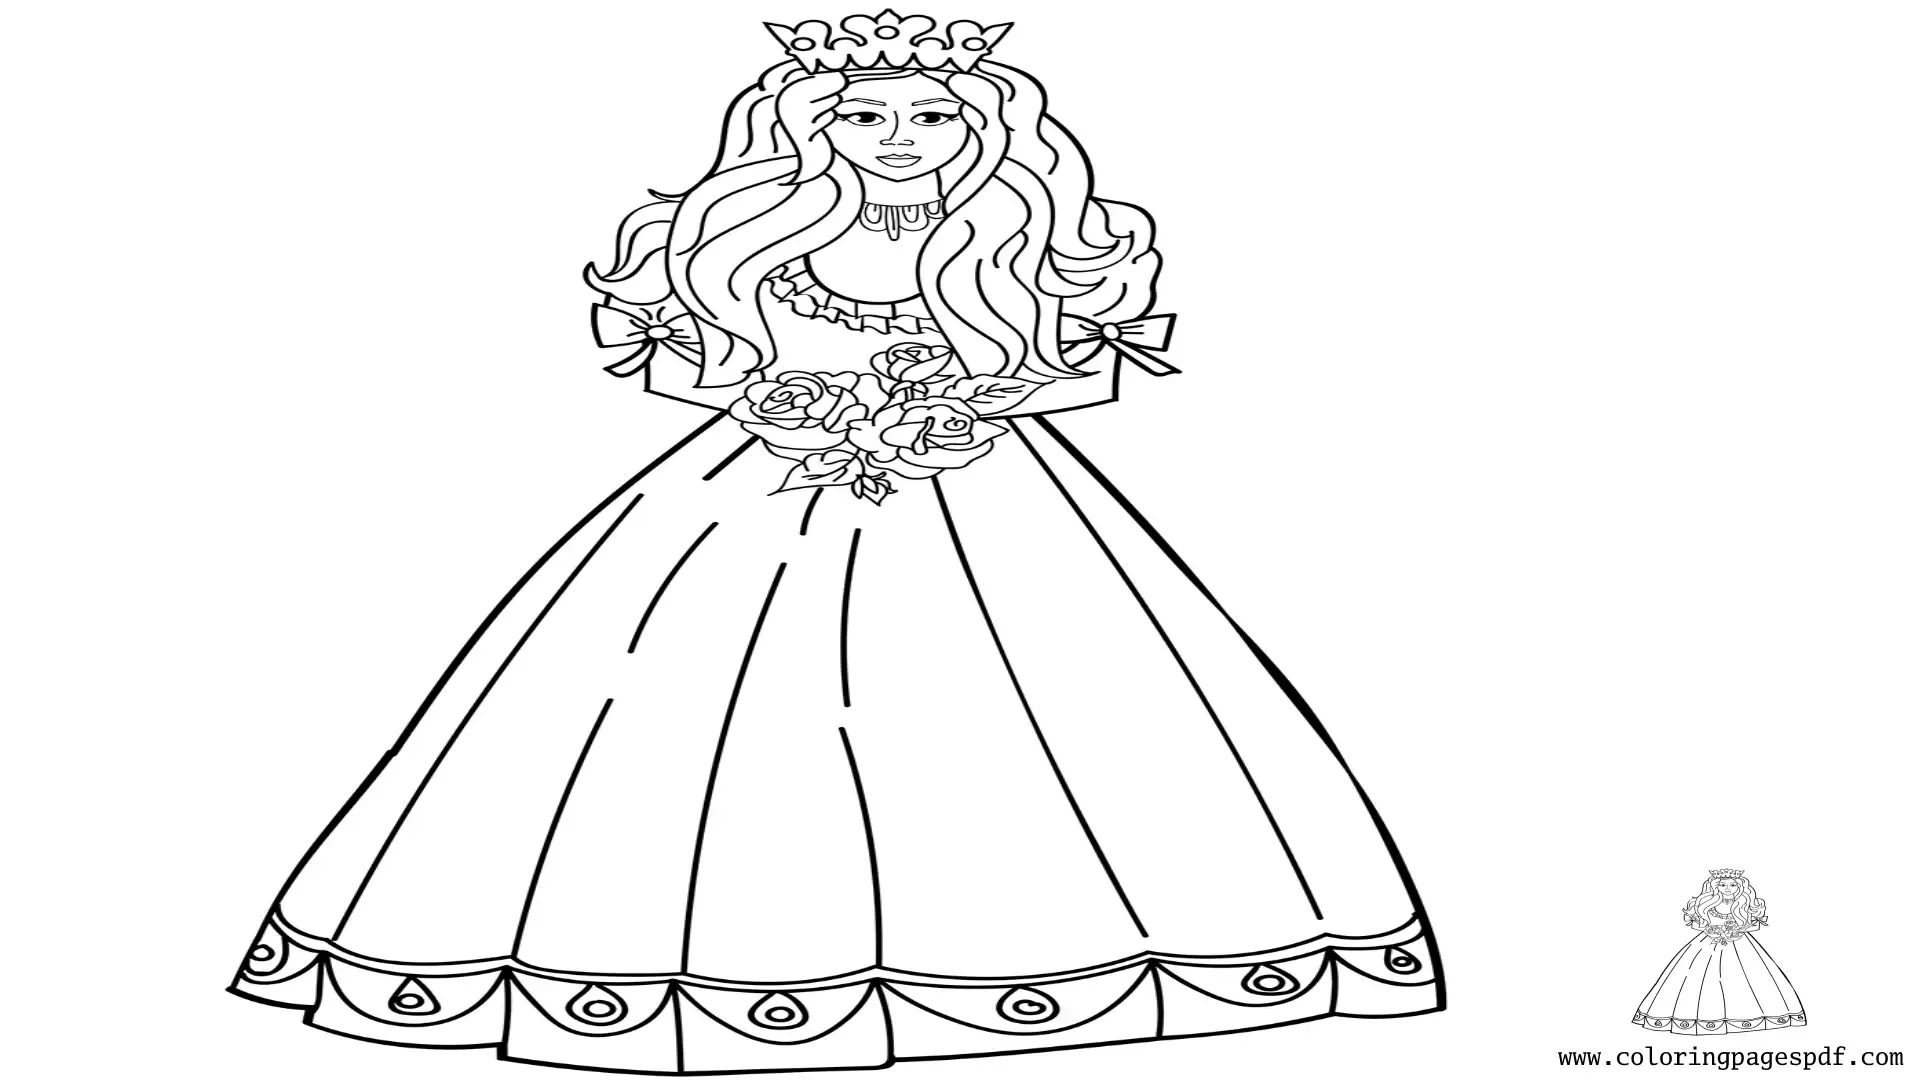 Coloring Page Of A Beautiful Princess Holding Flowers